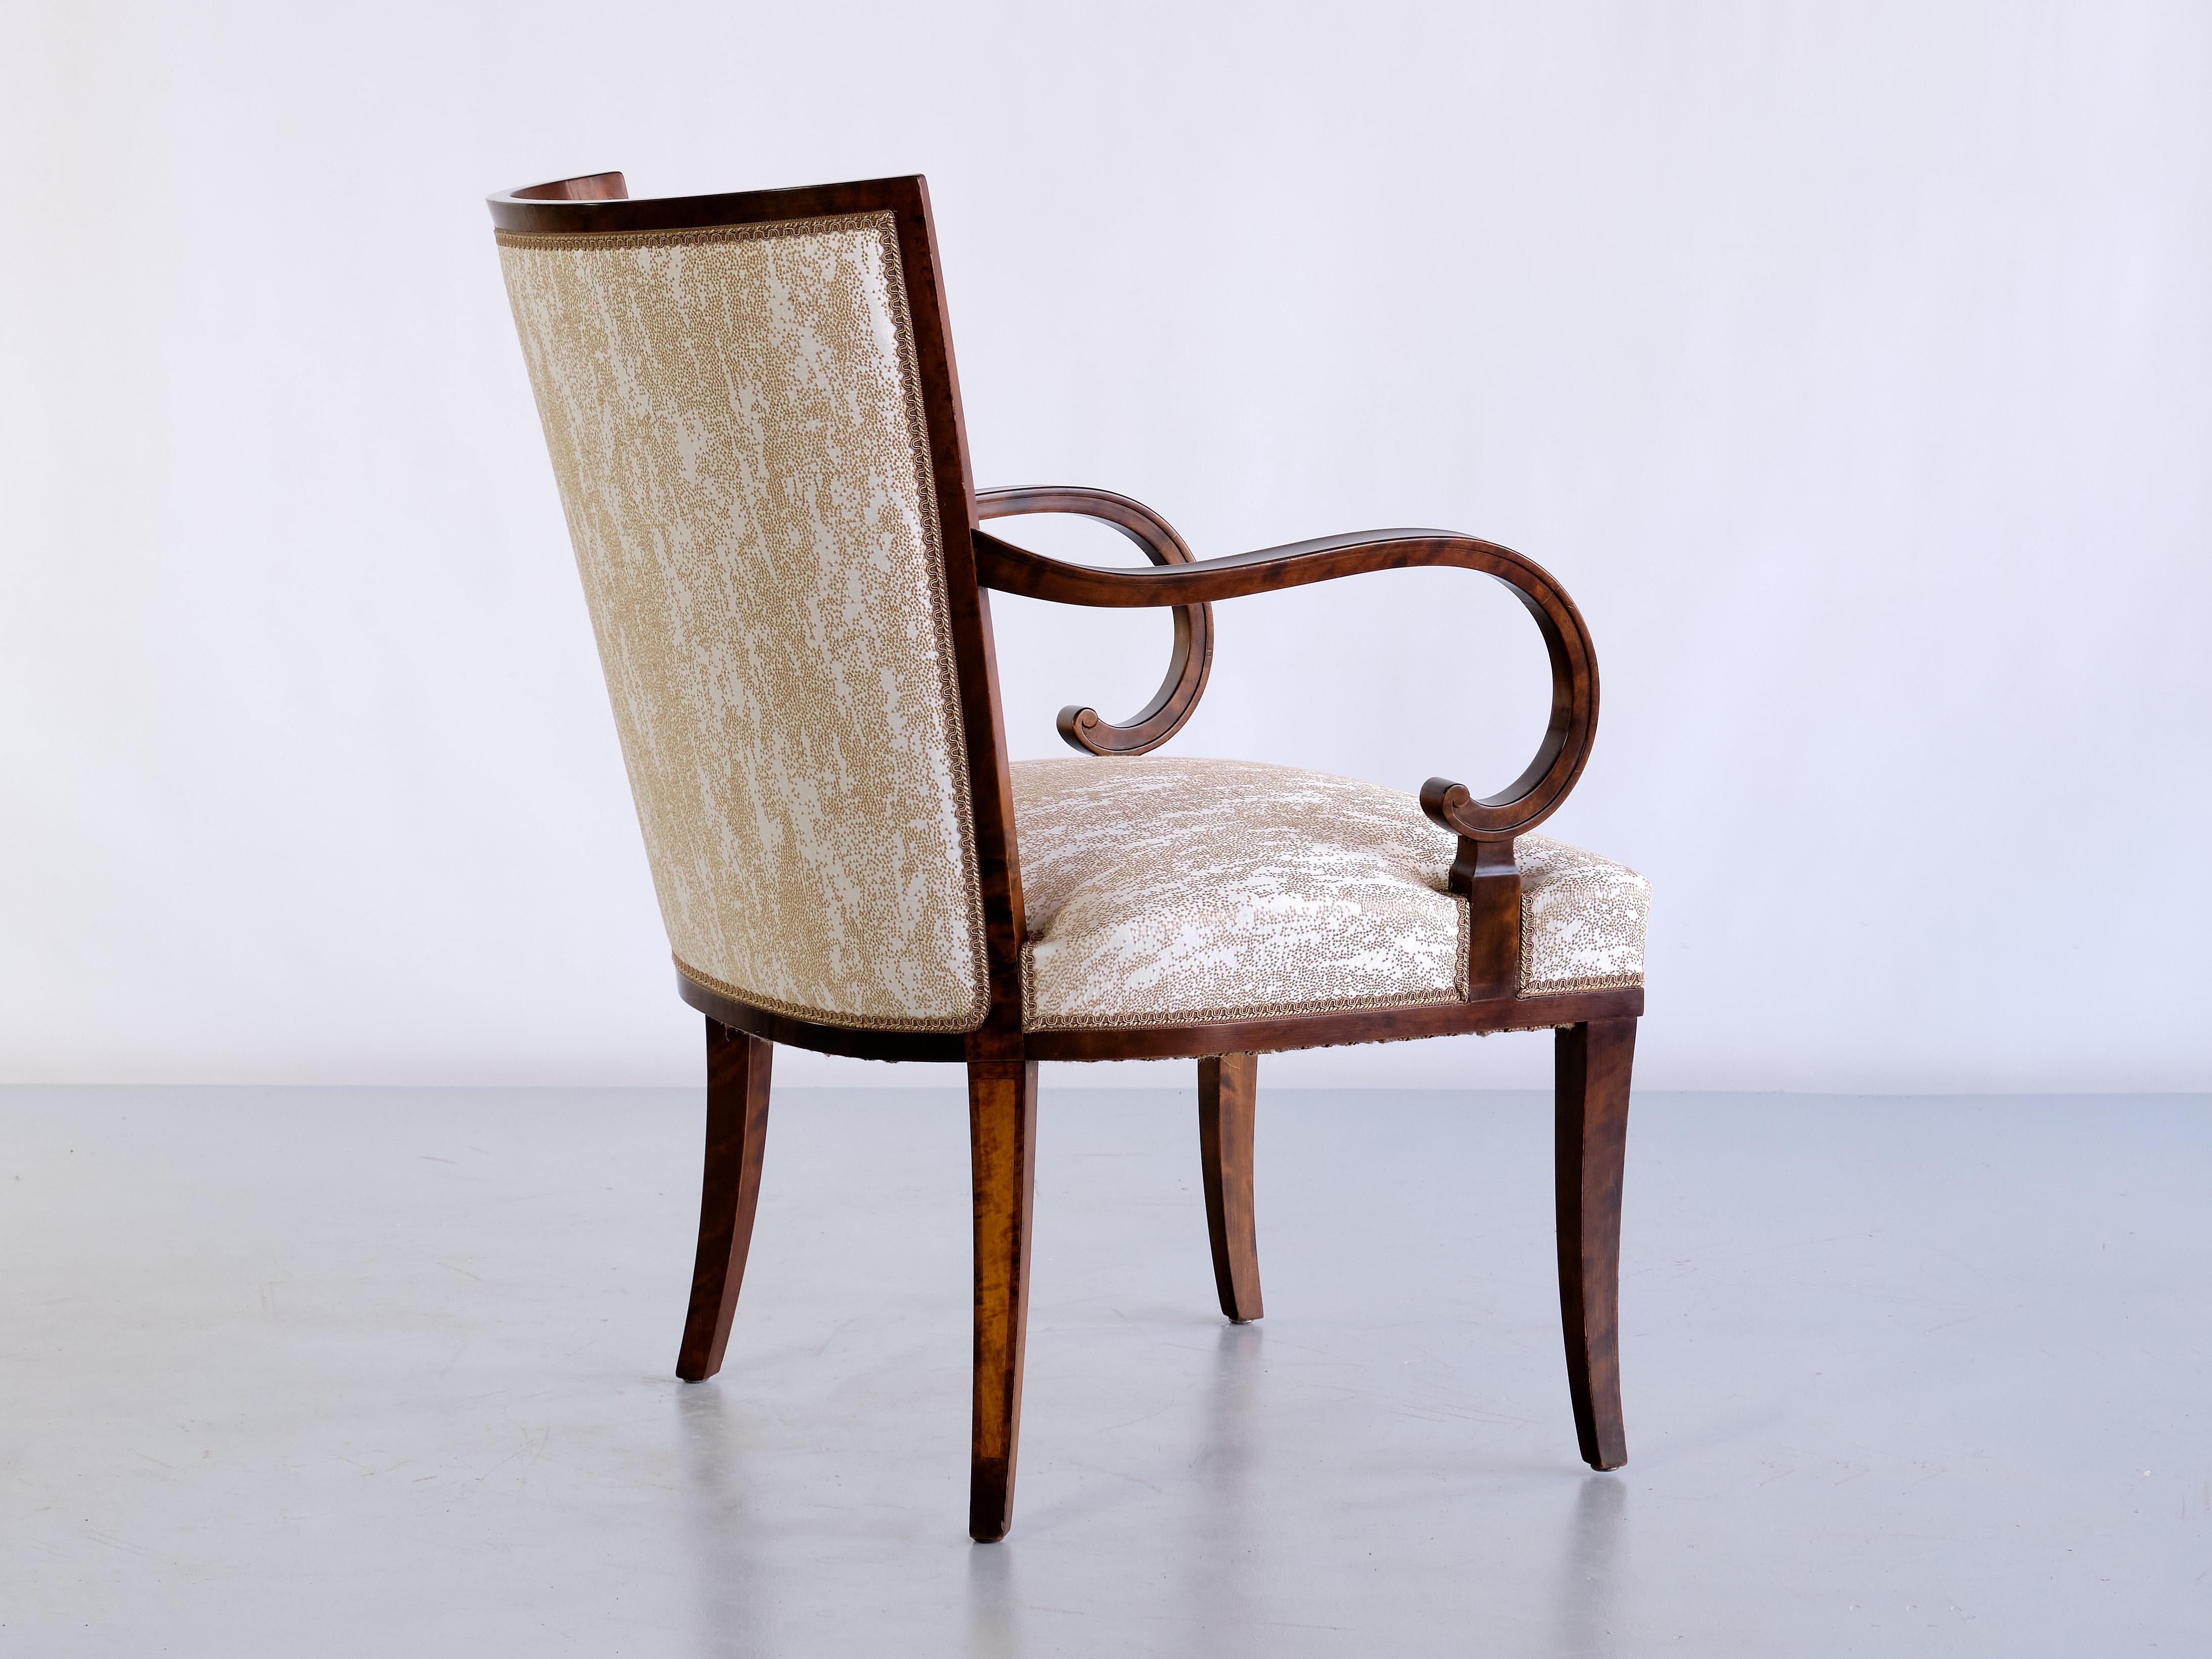 Pair of Carl Malmsten Armchairs in Birch and Satinwood, Bodafors, Sweden, 1930s For Sale 3